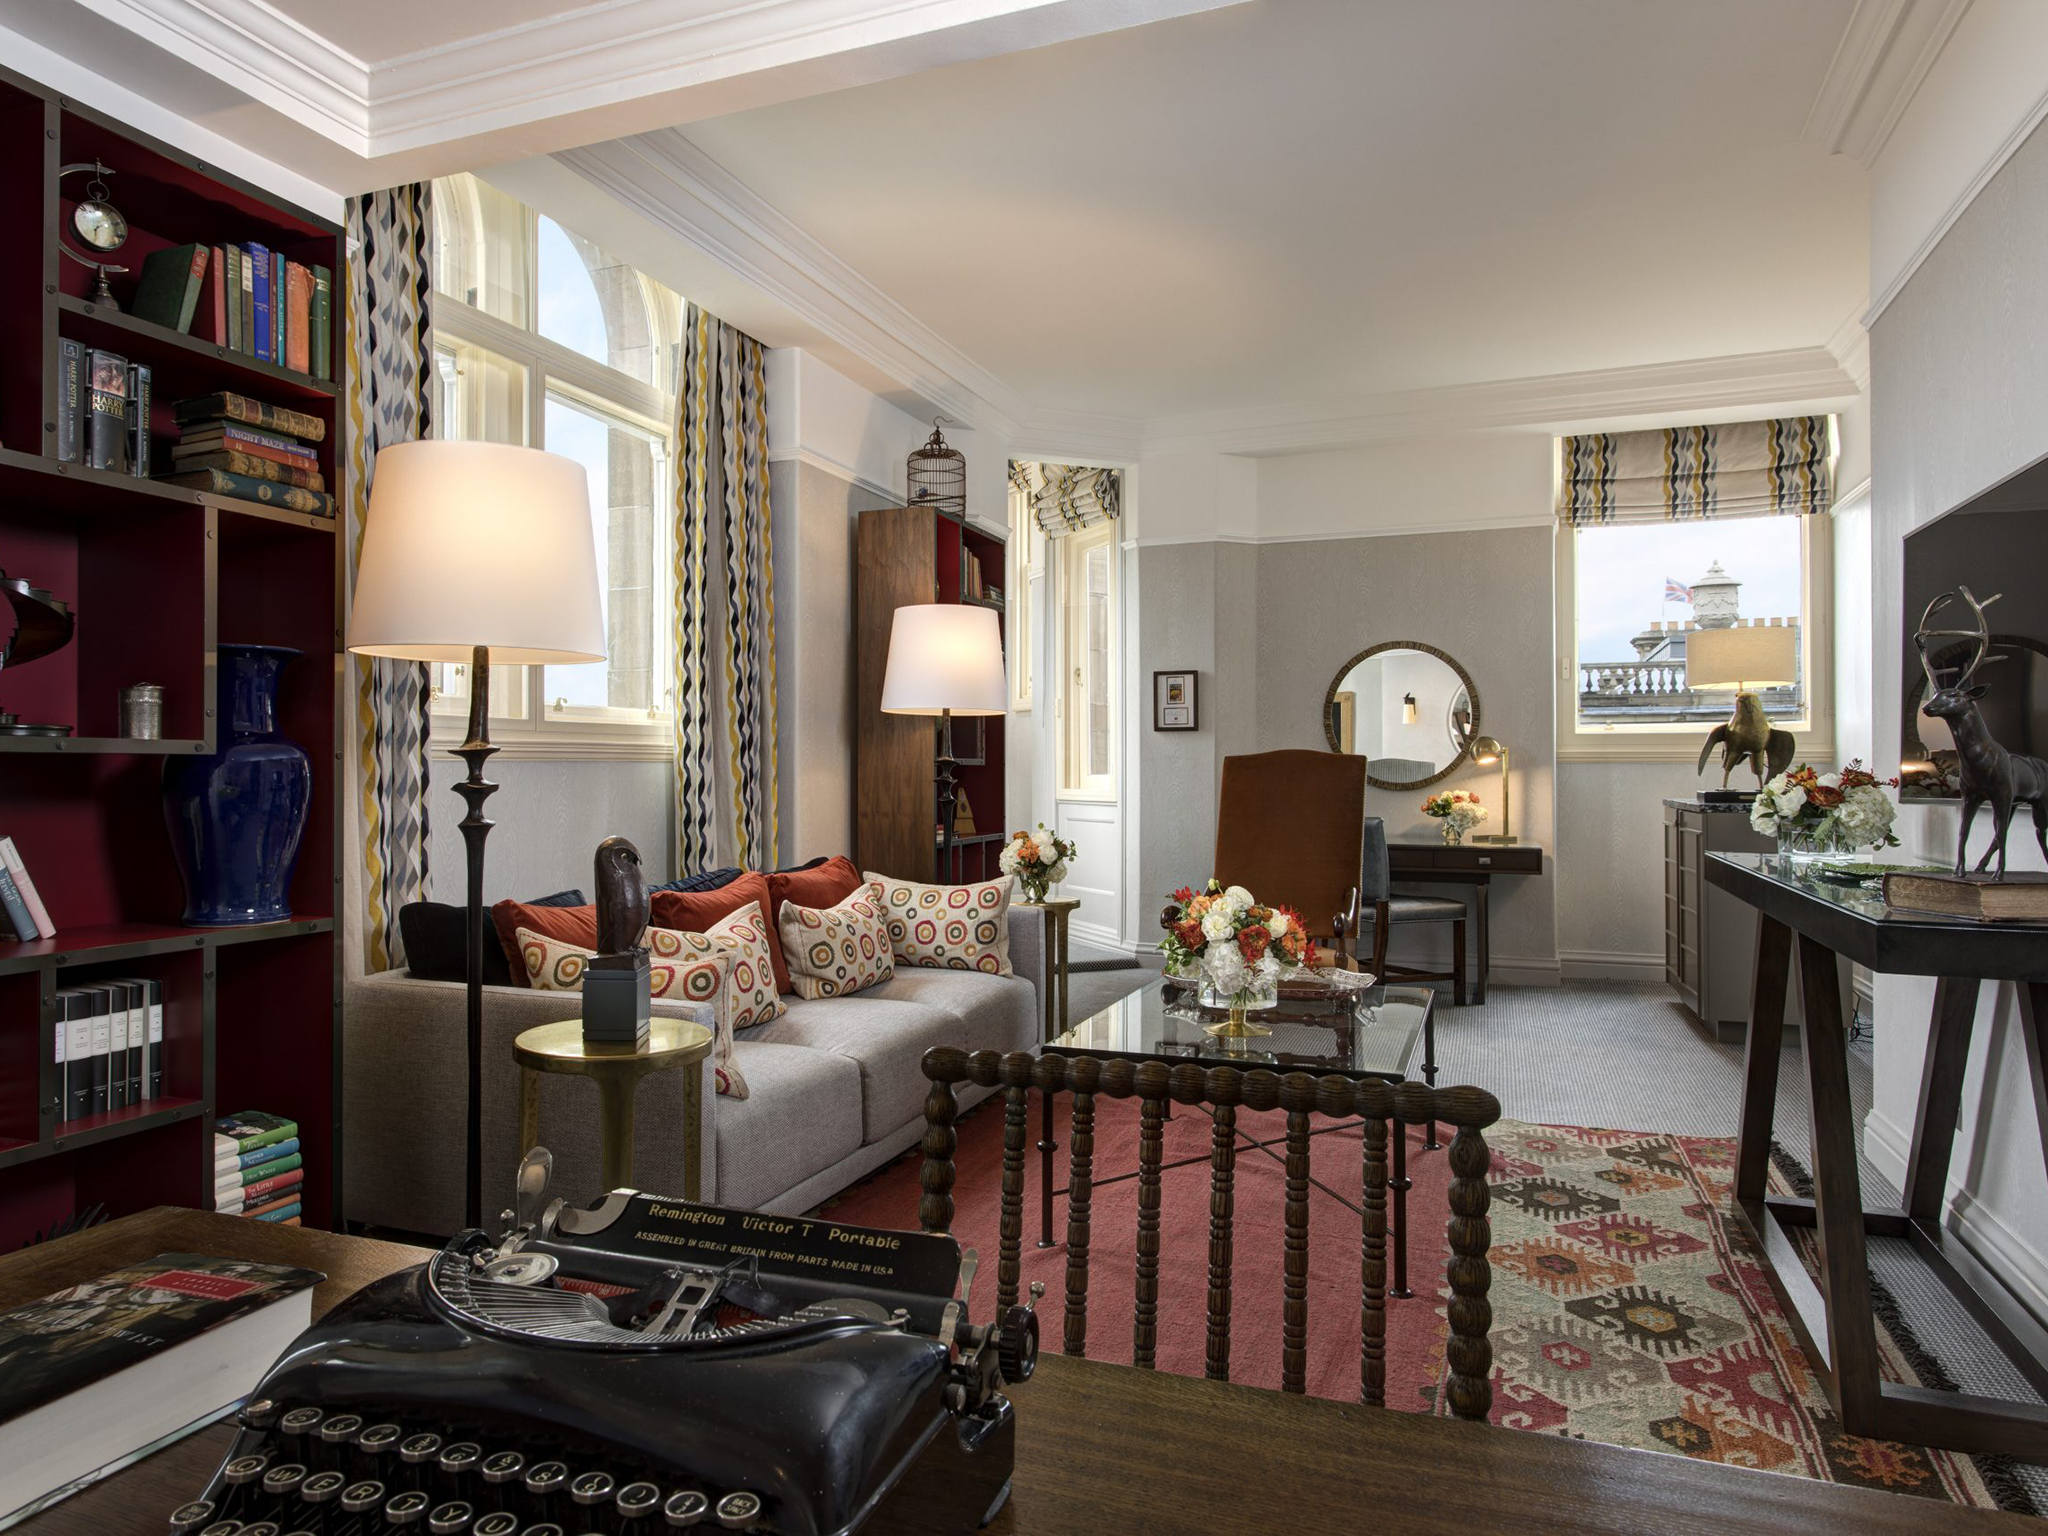 The J.K. Rowling suite at the Balmoral